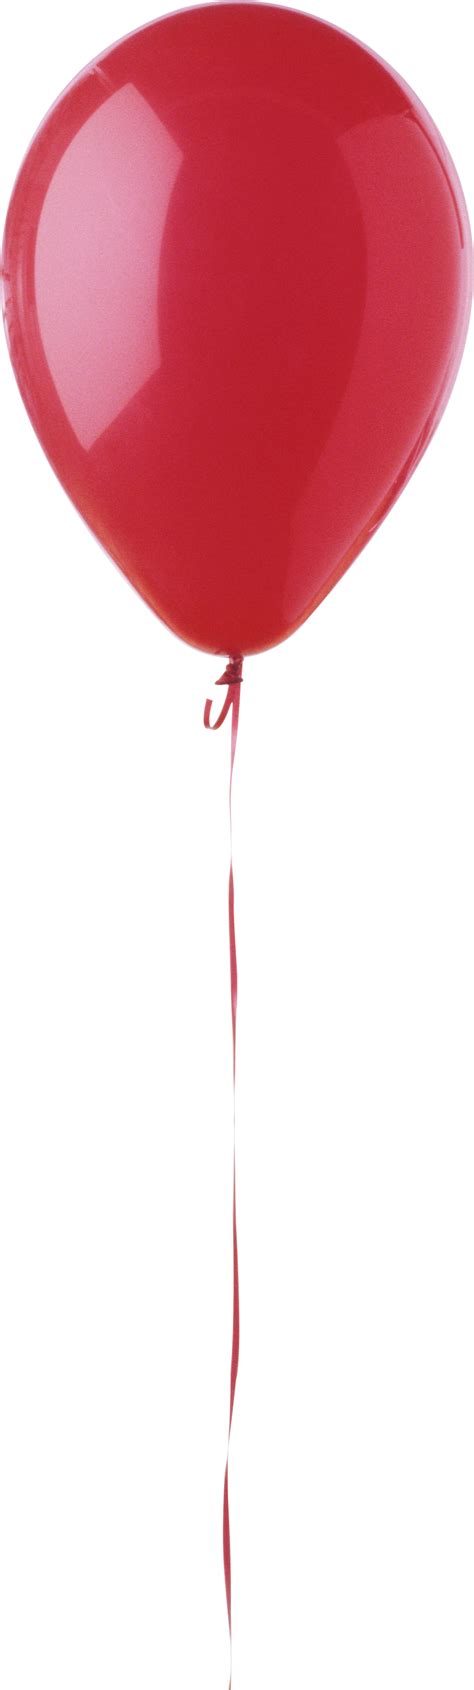 Balloons Png Image